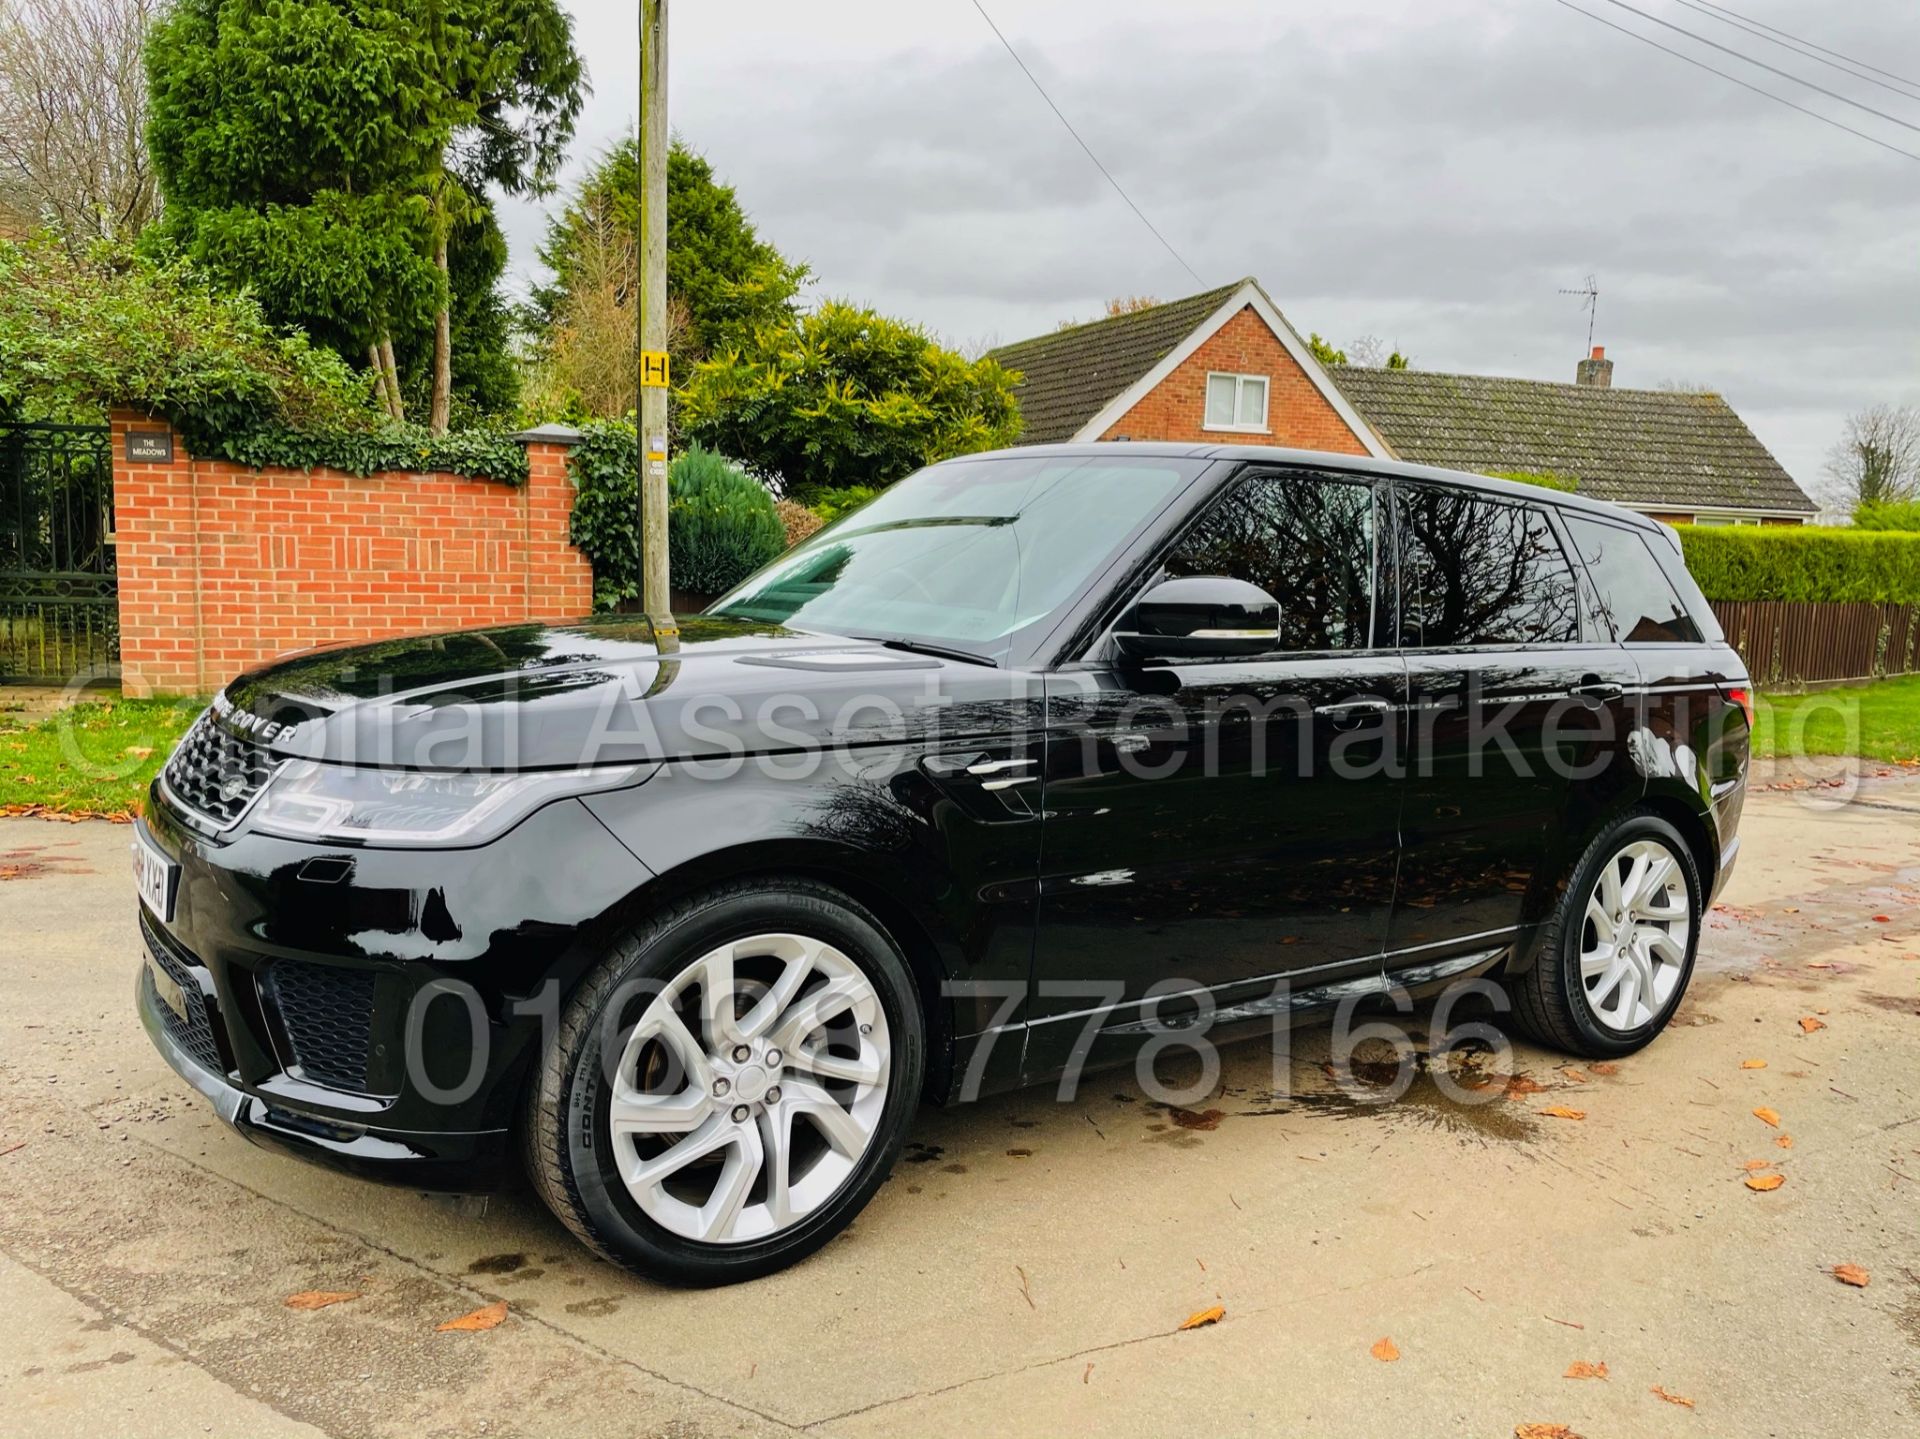 RANGE ROVER SPORT *HSE EDITION* SUV (2019 MODEL) '3.0 SDV6 - 306 BHP - 8 SPEED AUTO' *FULLY LOADED* - Image 7 of 56